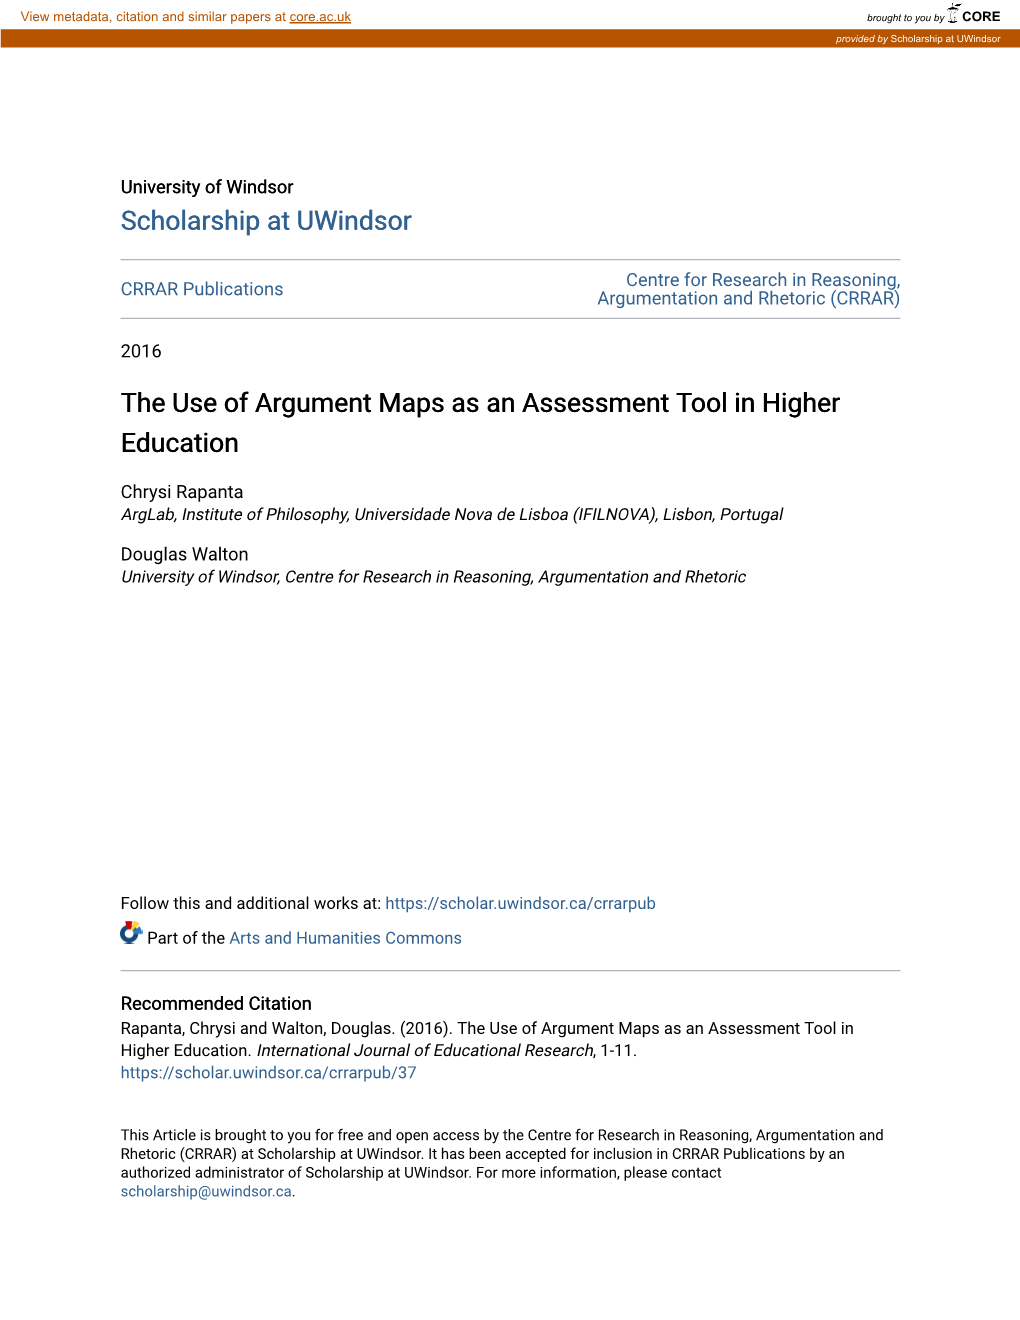 The Use of Argument Maps As an Assessment Tool in Higher Education